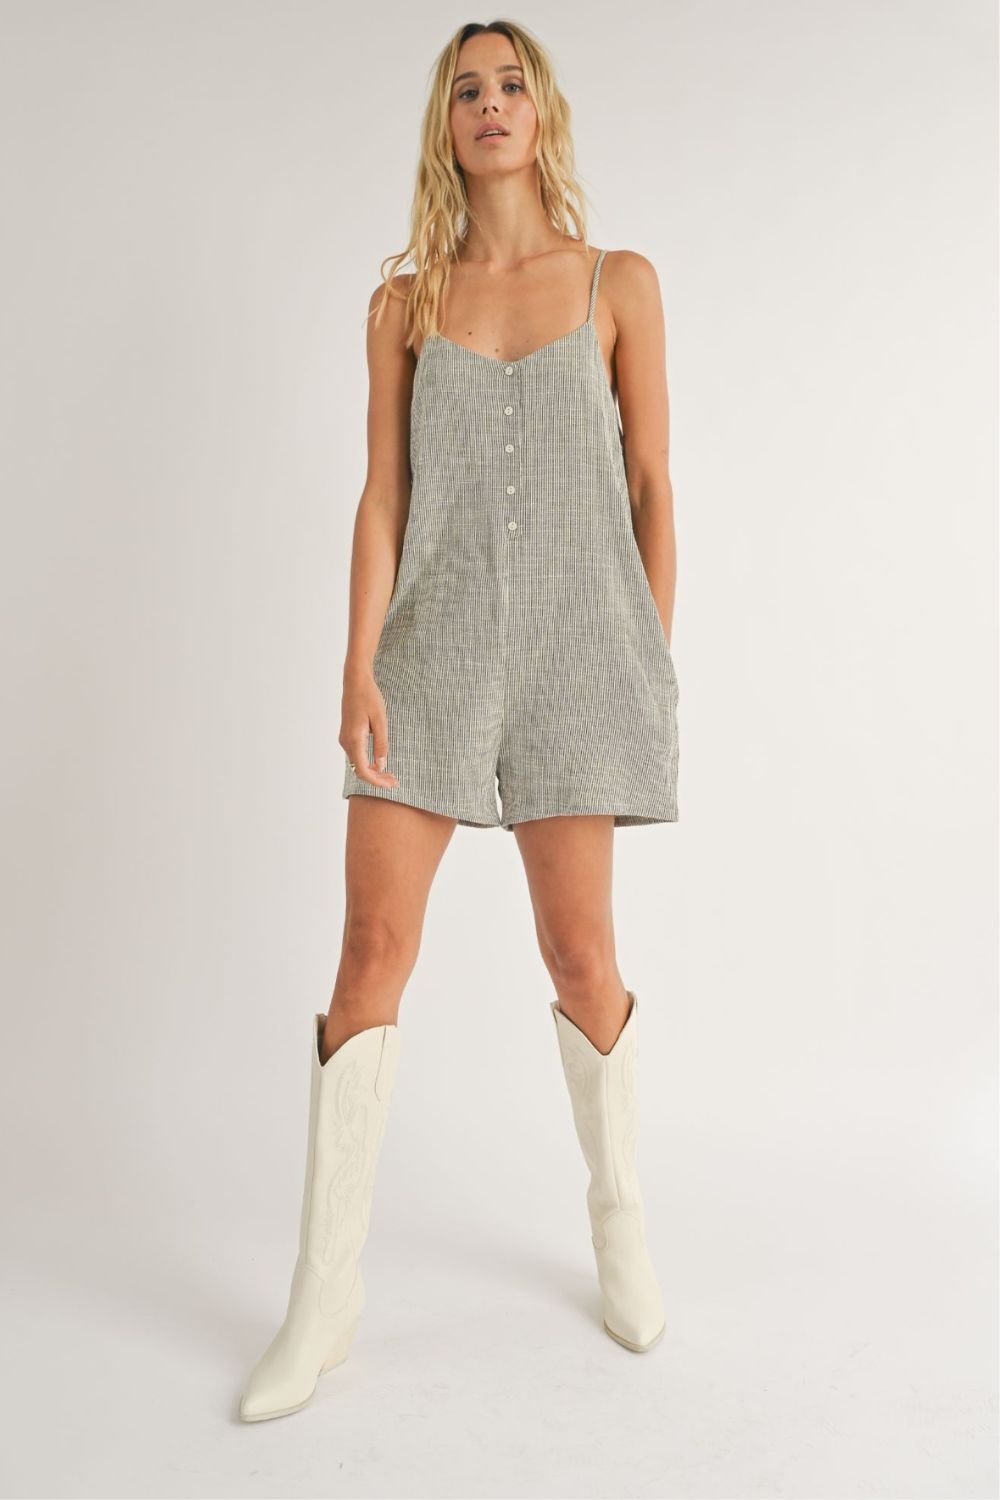 Women's Relaxed Fit Boxy Romper | Granola Girl Summer Rompers | Ivory Black - Women's Romper - Blooming Daily